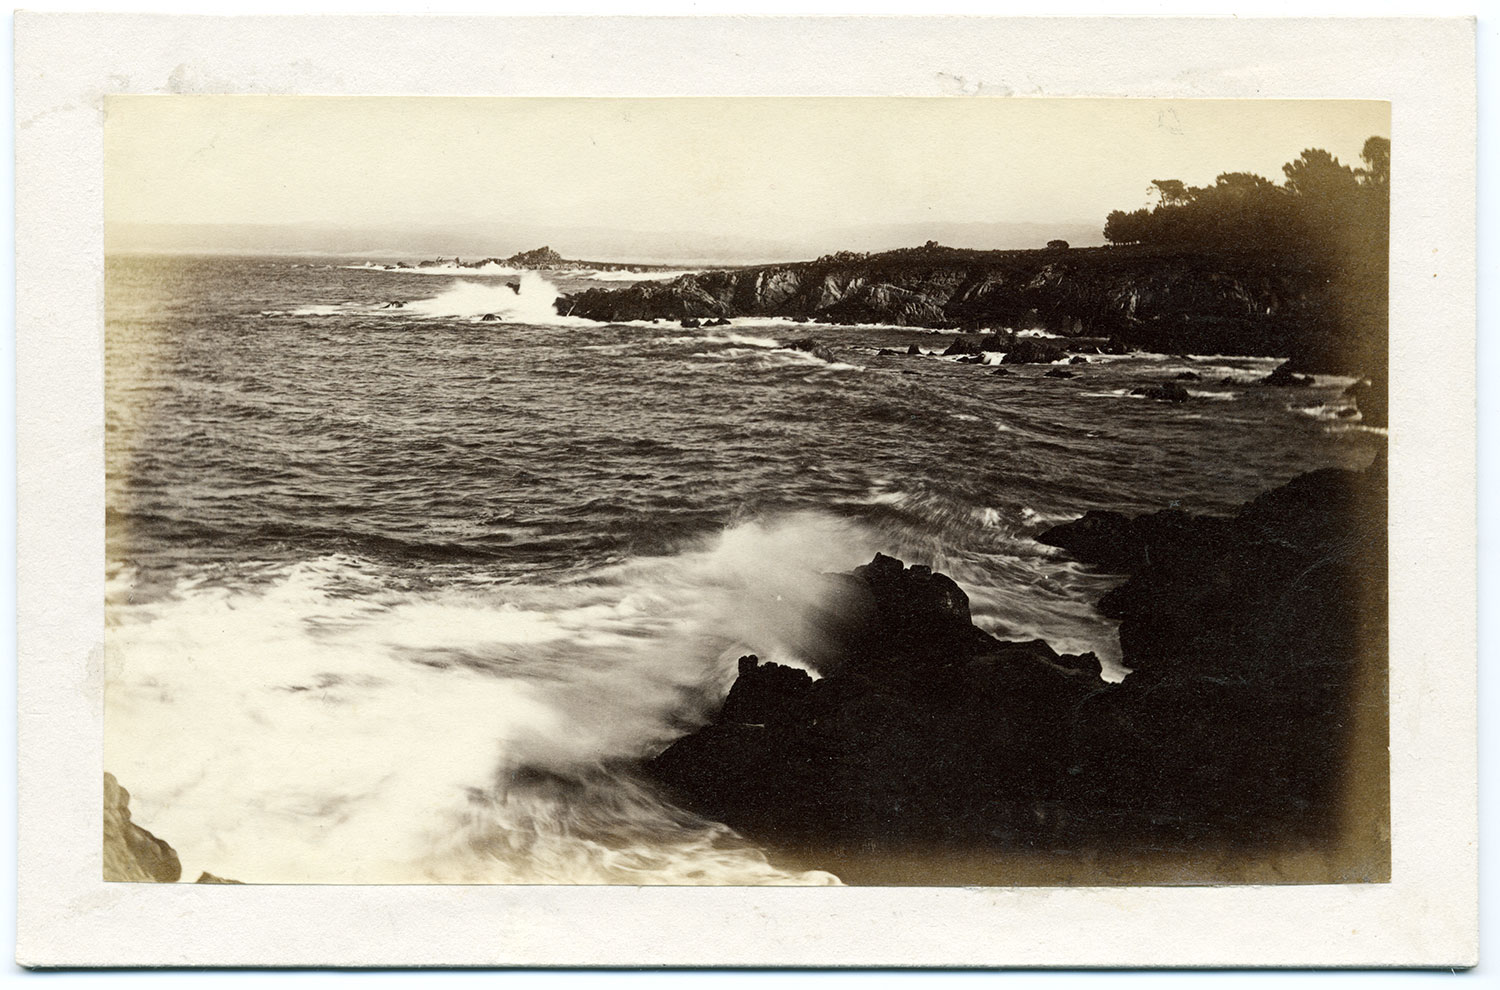 Watkins Unnumbered View - View at Pacific Grove, Monterey, Cal.